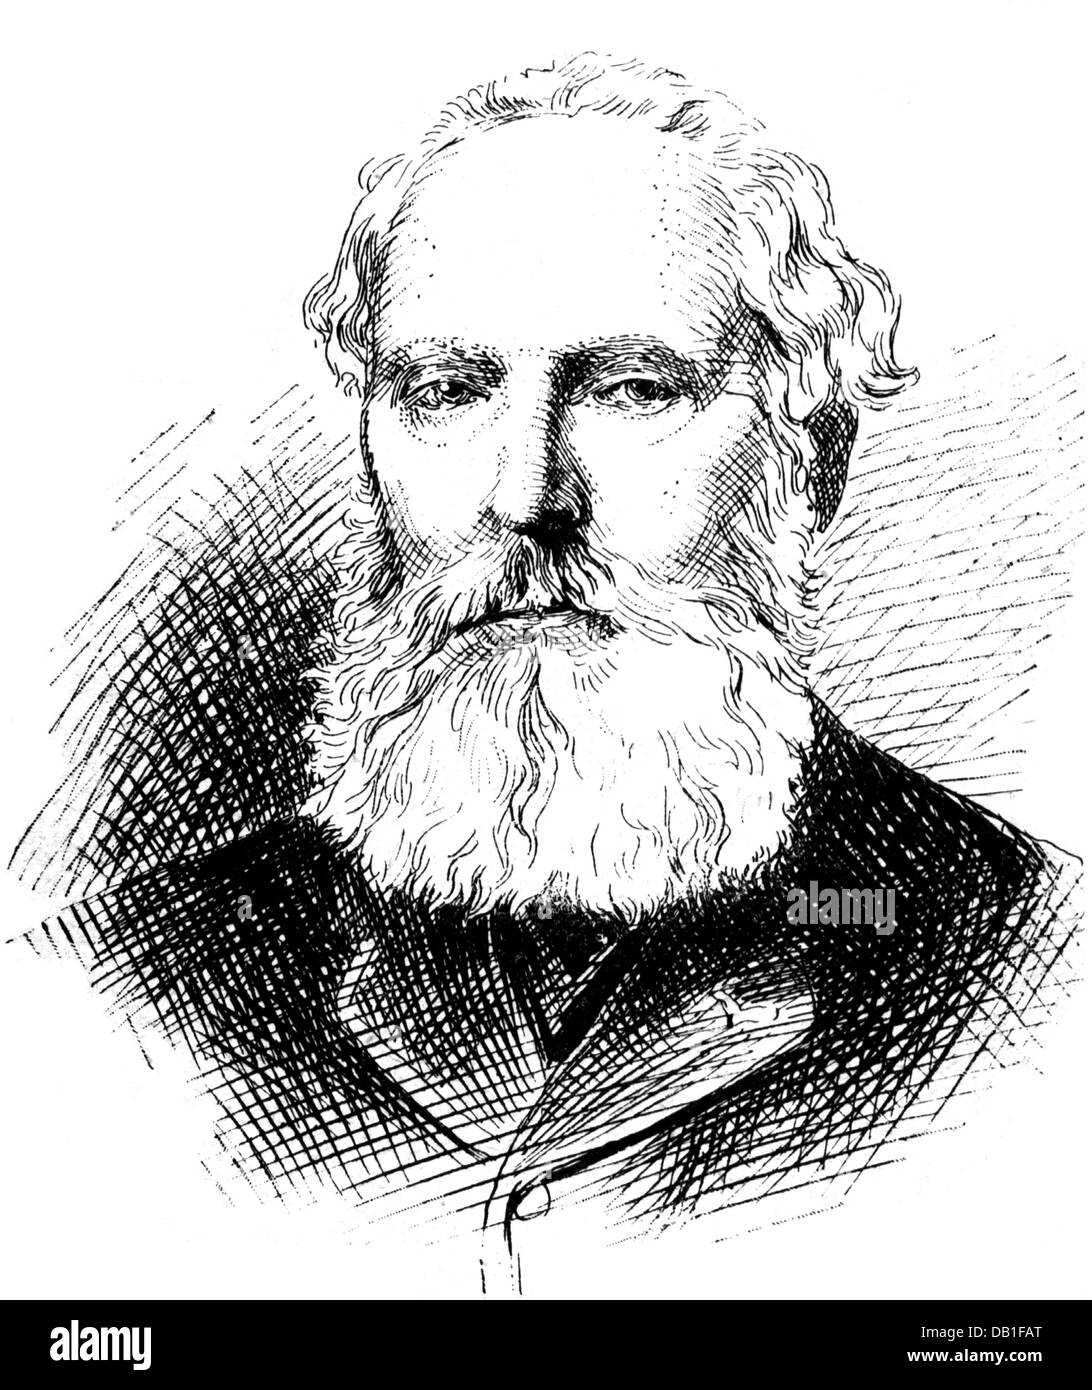 Beaumont, Charles-Edouard de, 1821 - 12.1.1888, French painter and lithographer, portrait, wood engraving after drawing by Emile Bayard, 19th century, Stock Photo